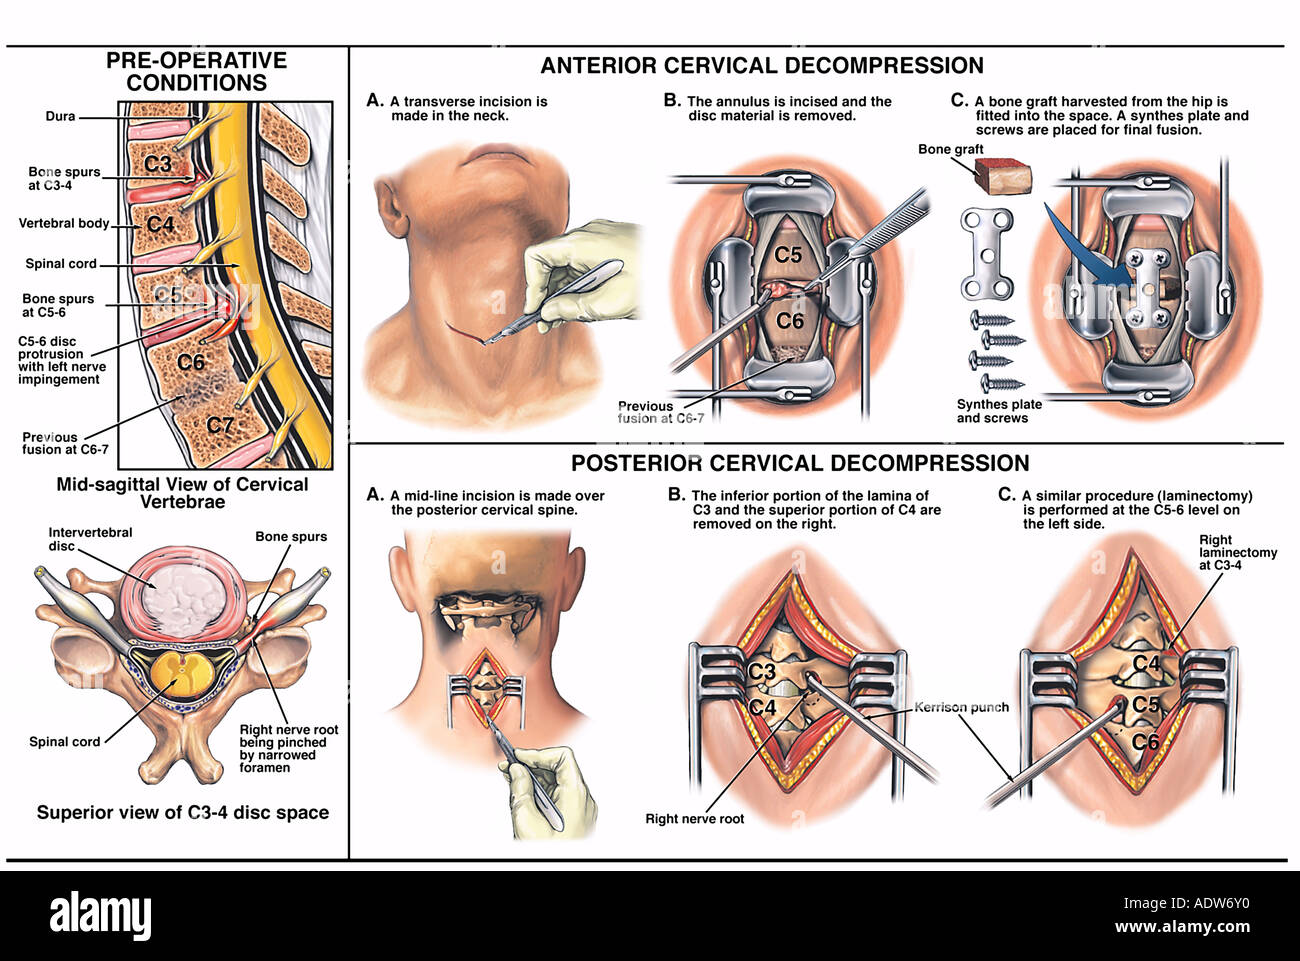 Neck Pain C5 6 Anterior and Posterior Cervical Decompression Surgery Stock Photo